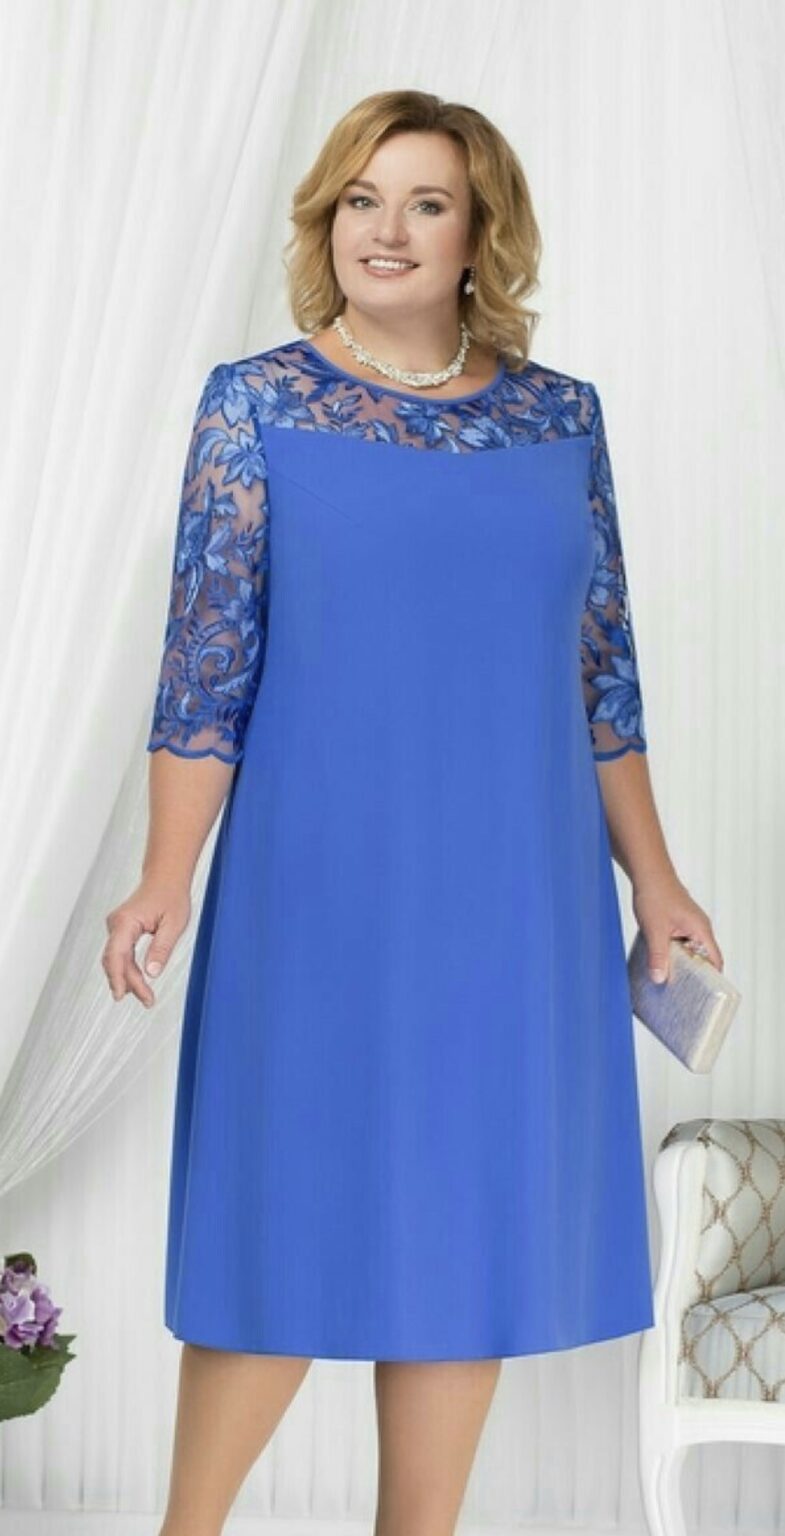 40 Stylish Mother of the Bride Dresses that Hide Belly - Plus Size ...